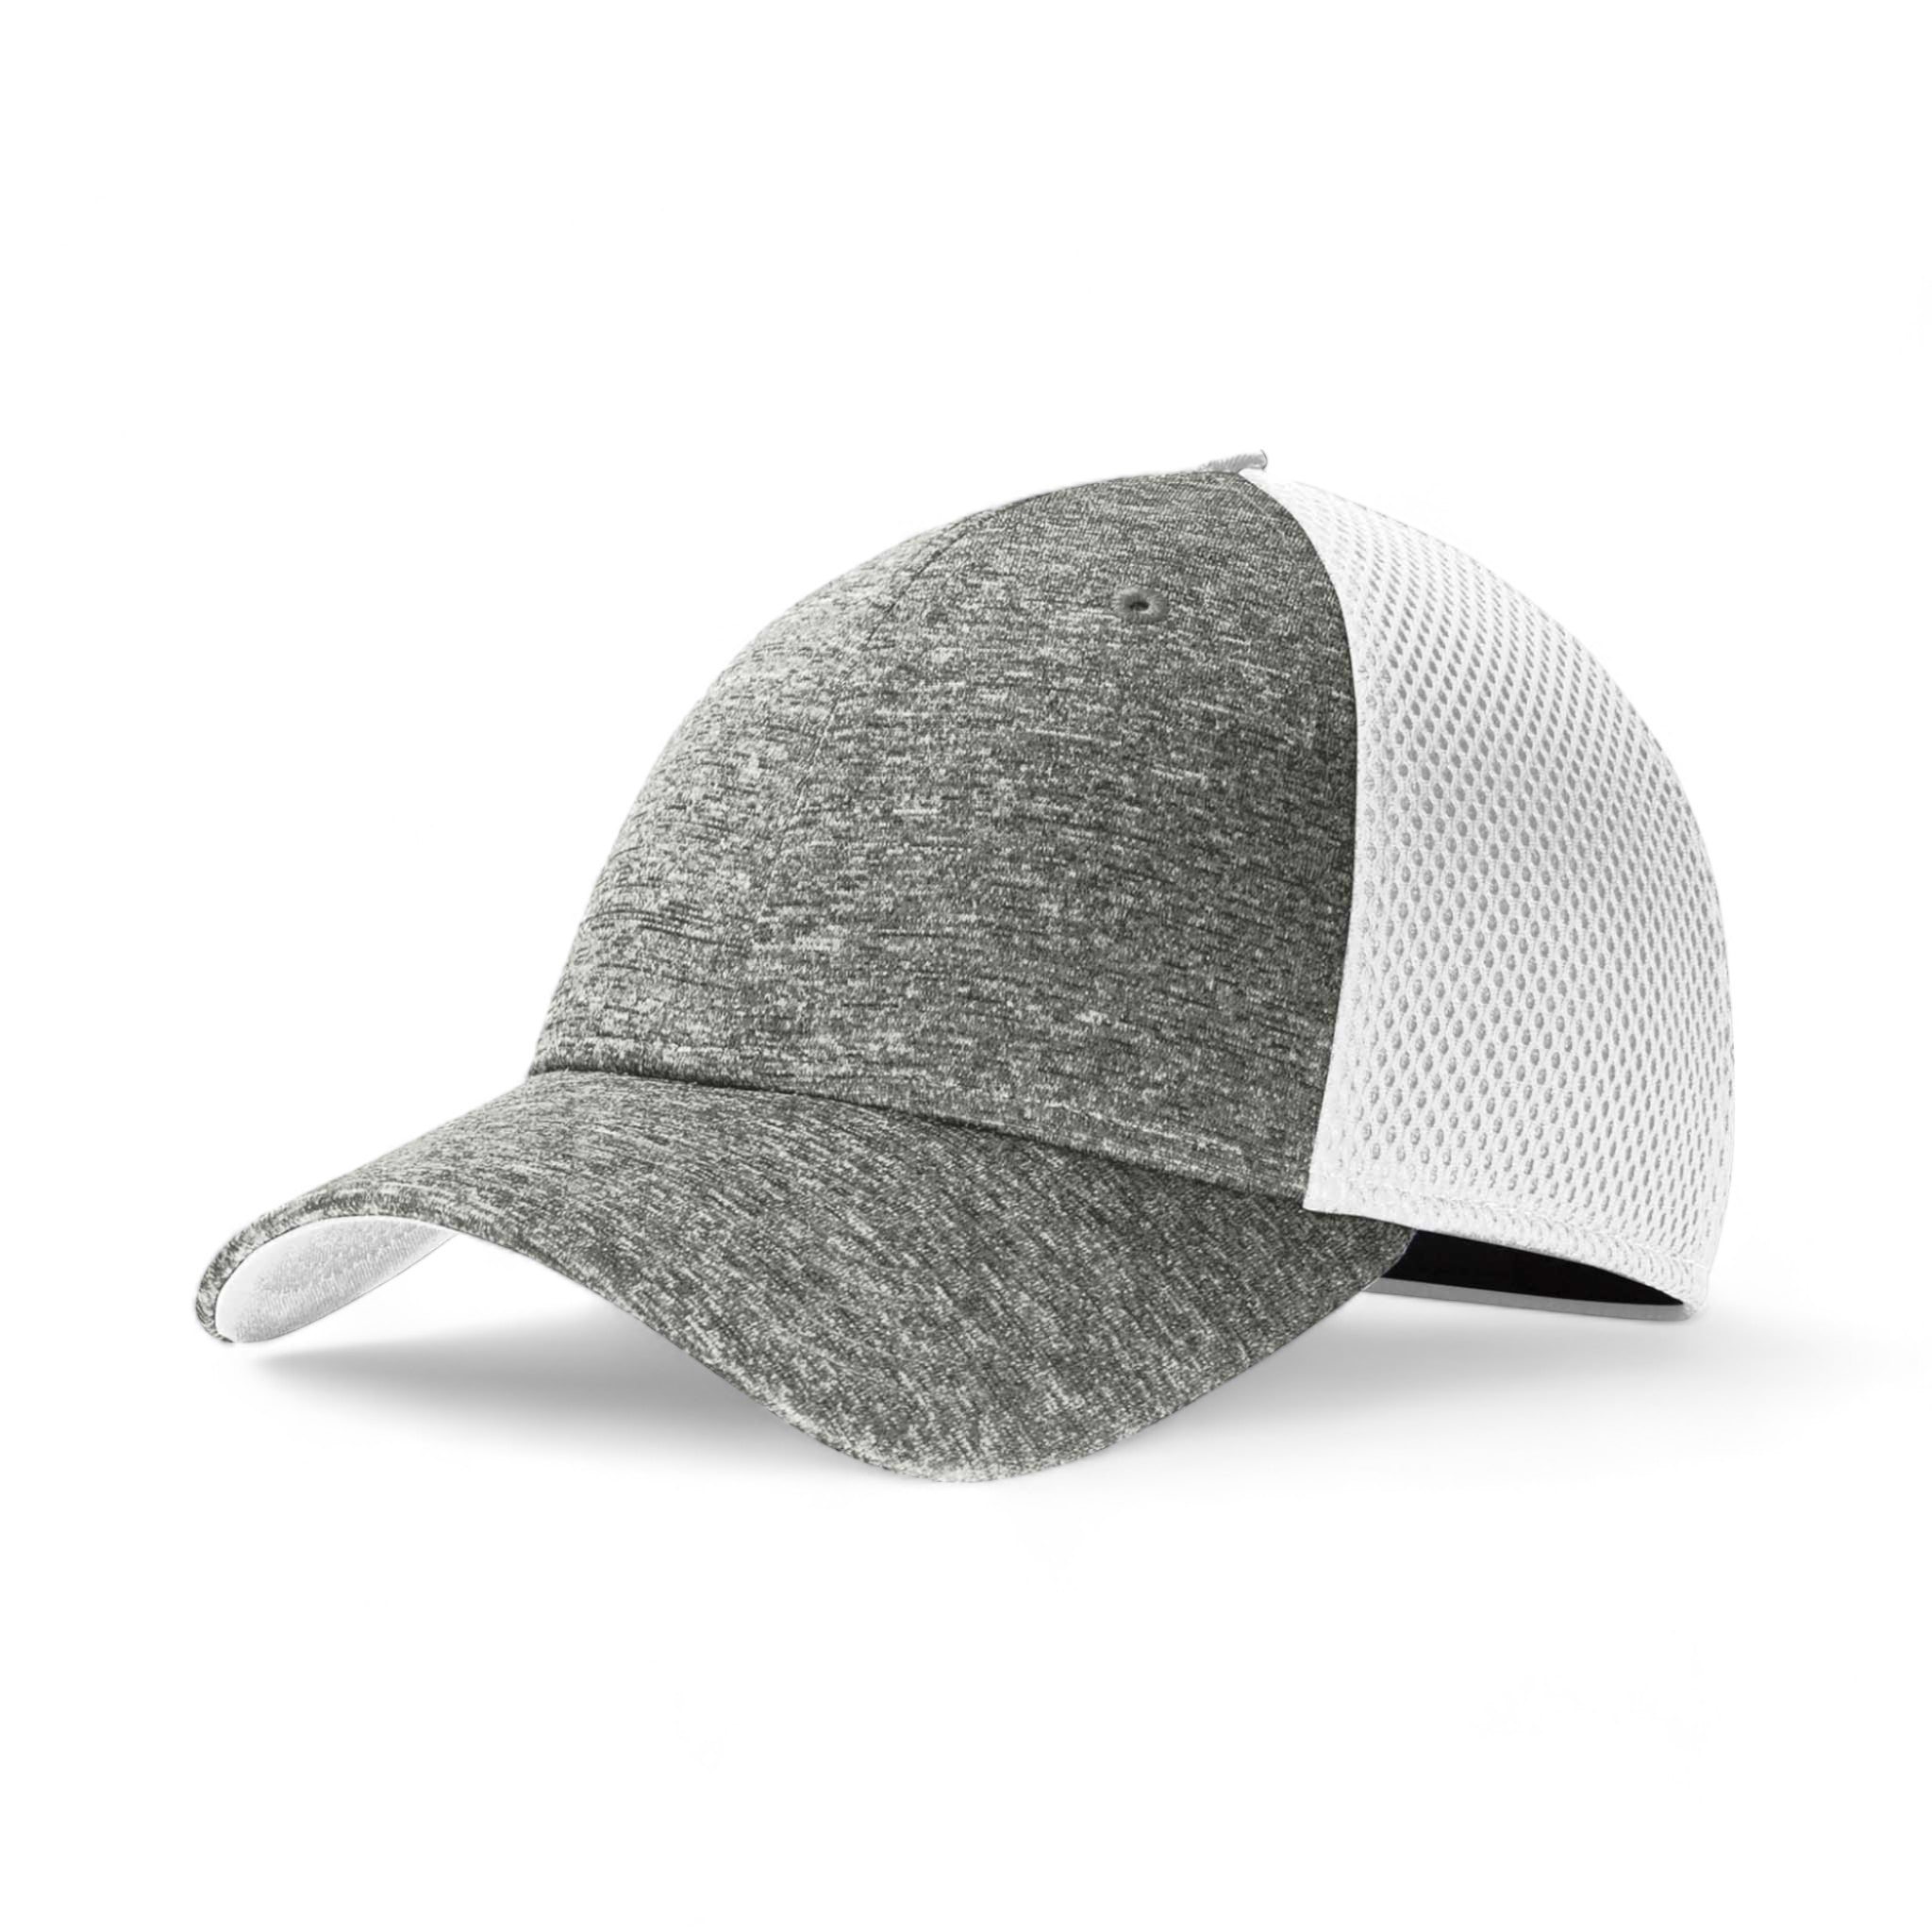 Side view of New Era NE702 custom hat in white and shadow heather